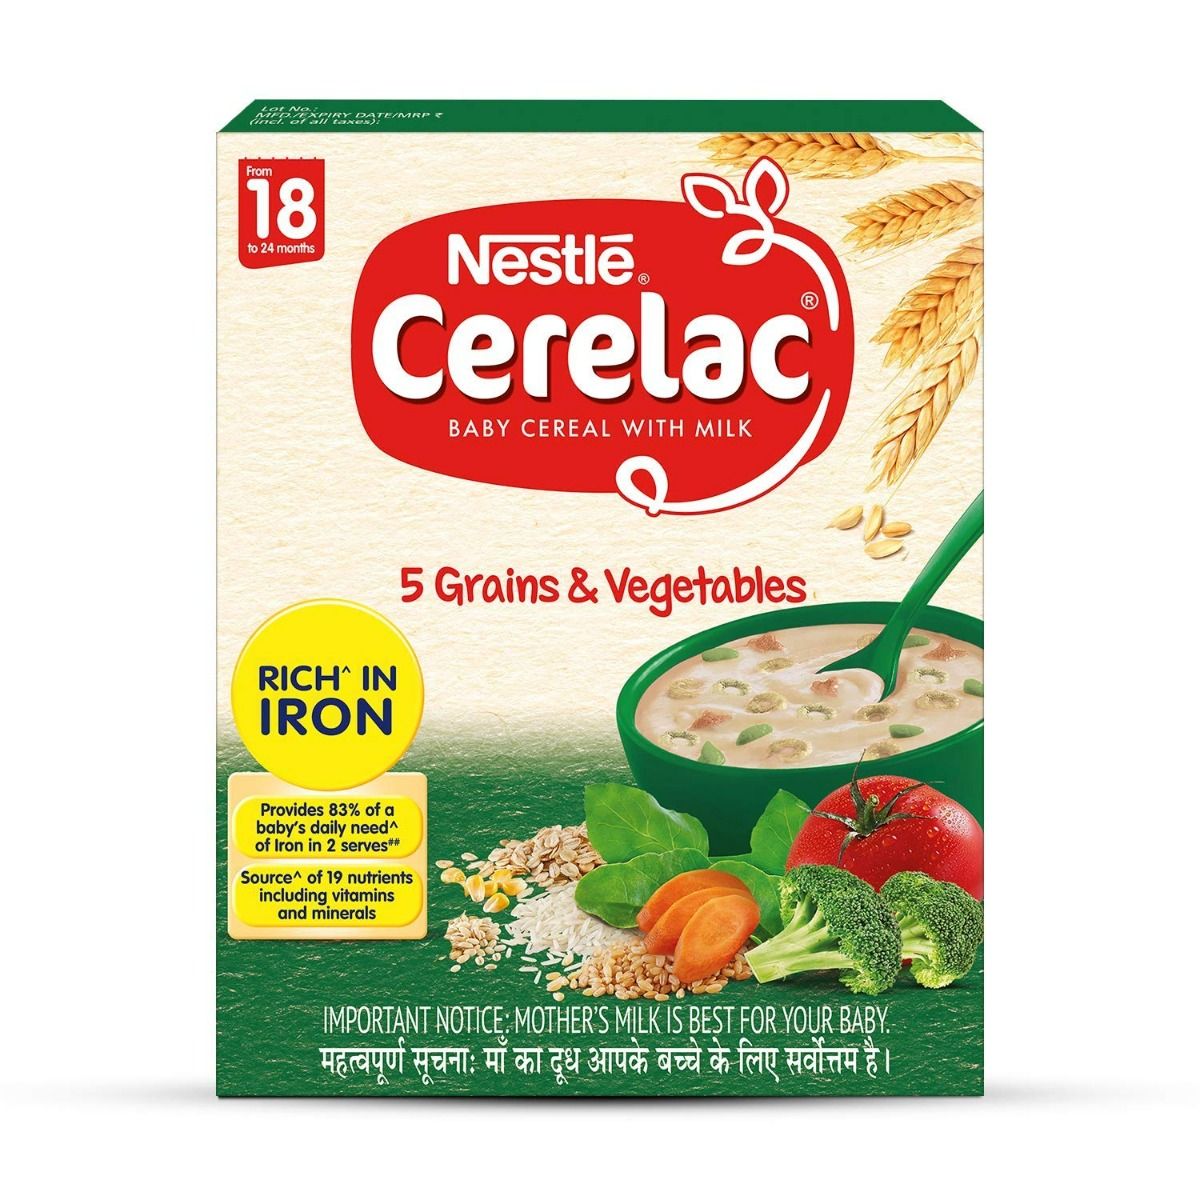 Buy Nestle Cerelac Baby Cereal with Milk Wheat 5 Grains & Vegetables (18 to 24 Months) Powder, 300 gm Online